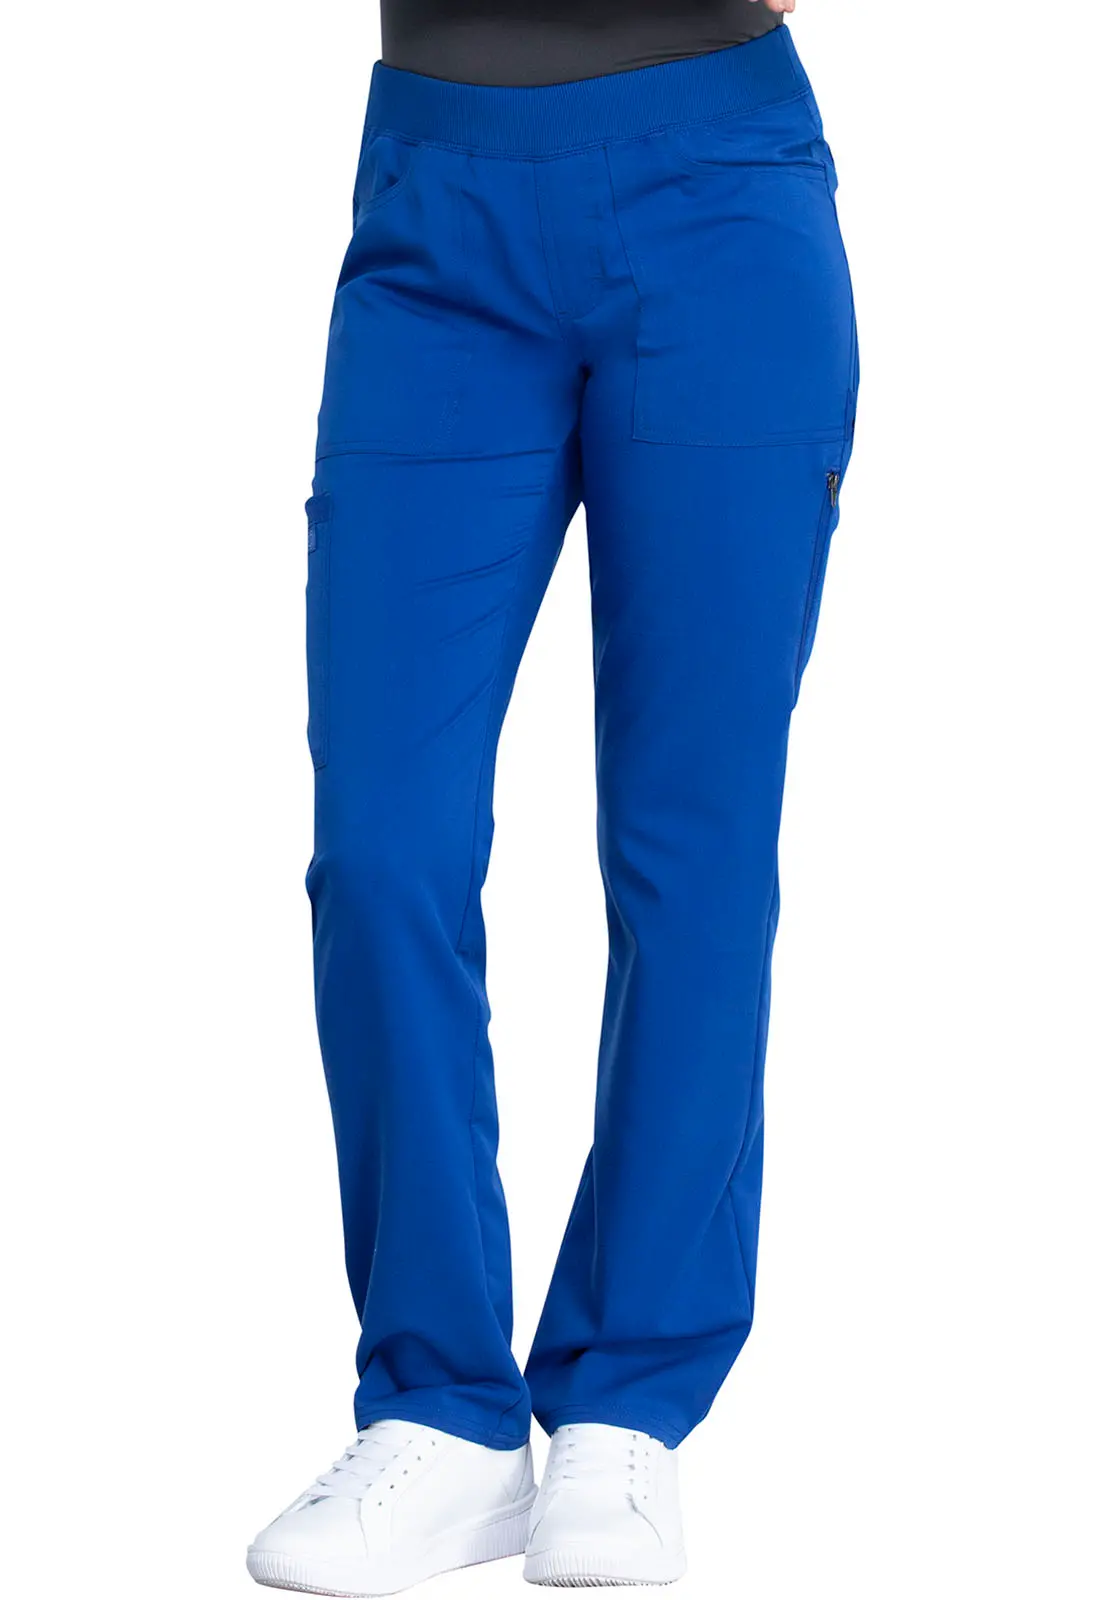 Mid Rise Tapered Leg Pull-on Pant-Dickies Medical